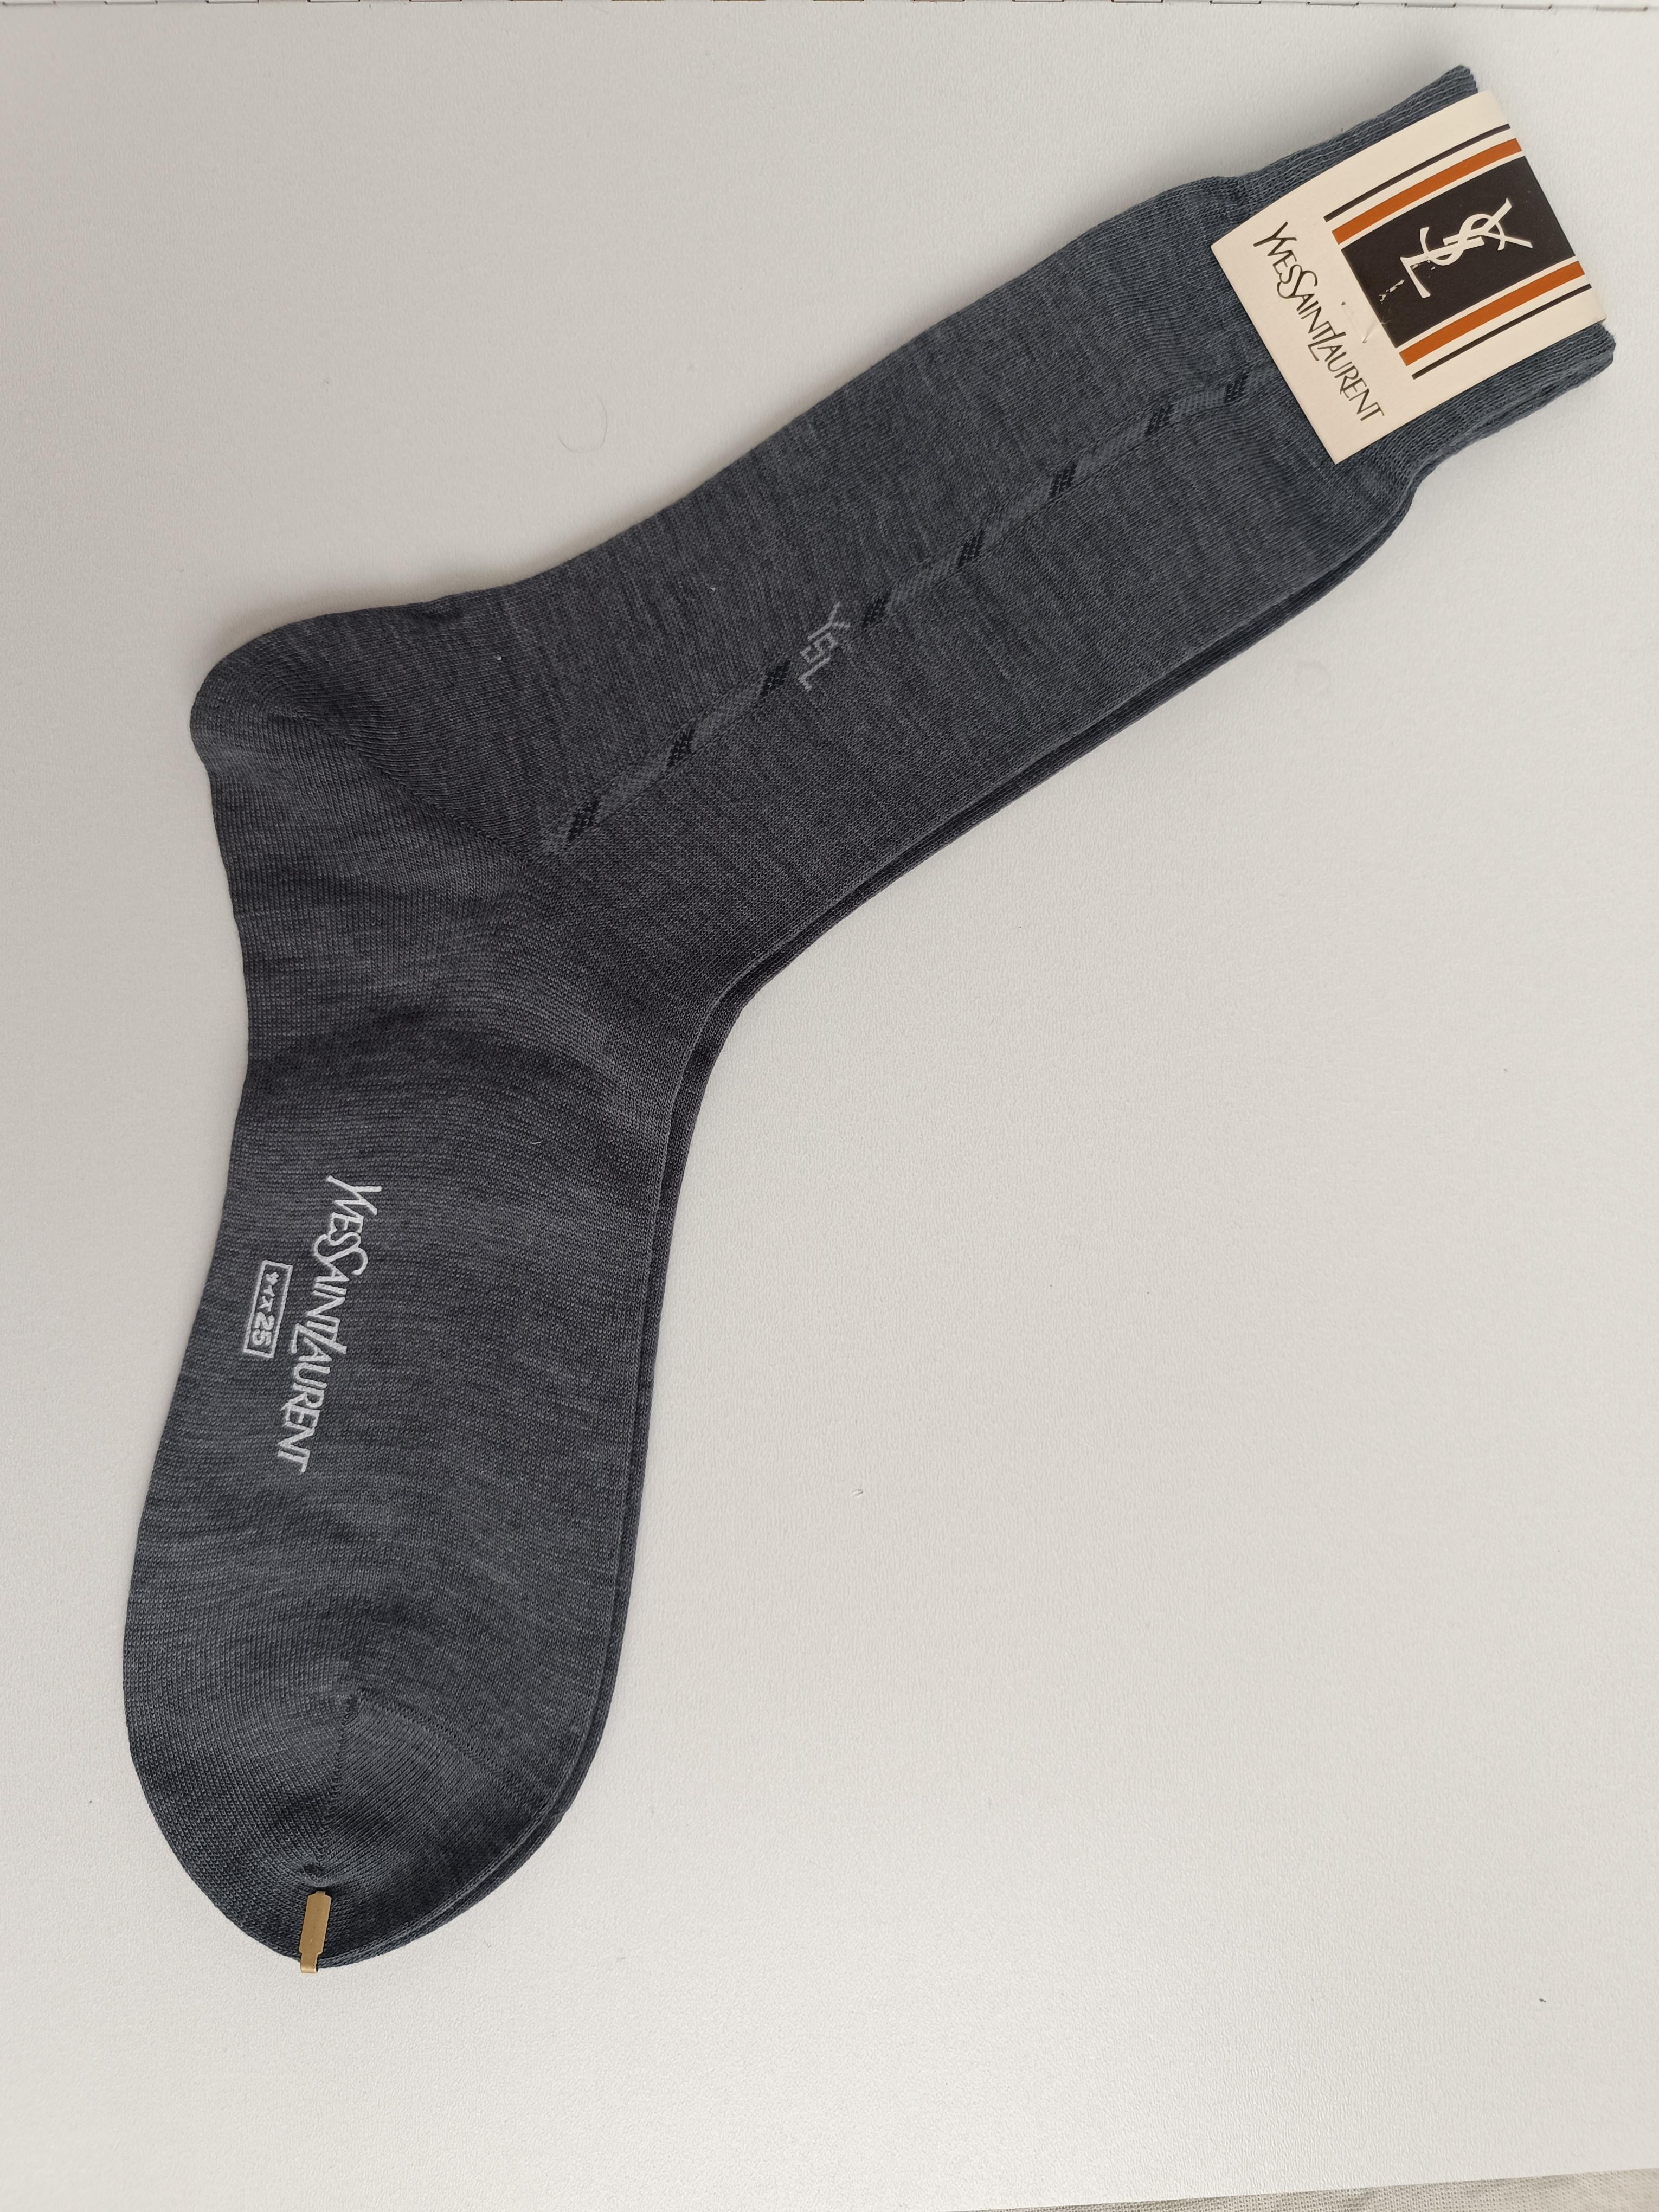 Authentic Yves Saint Laurent Vintage Men’s Socks YSL
Country of manufacture: Japan
Color: Grey with blue
Unisex.
It's great to wear or give away!
We strive to ensure high quality control, and more significant flaws will be shown in the photos and/or